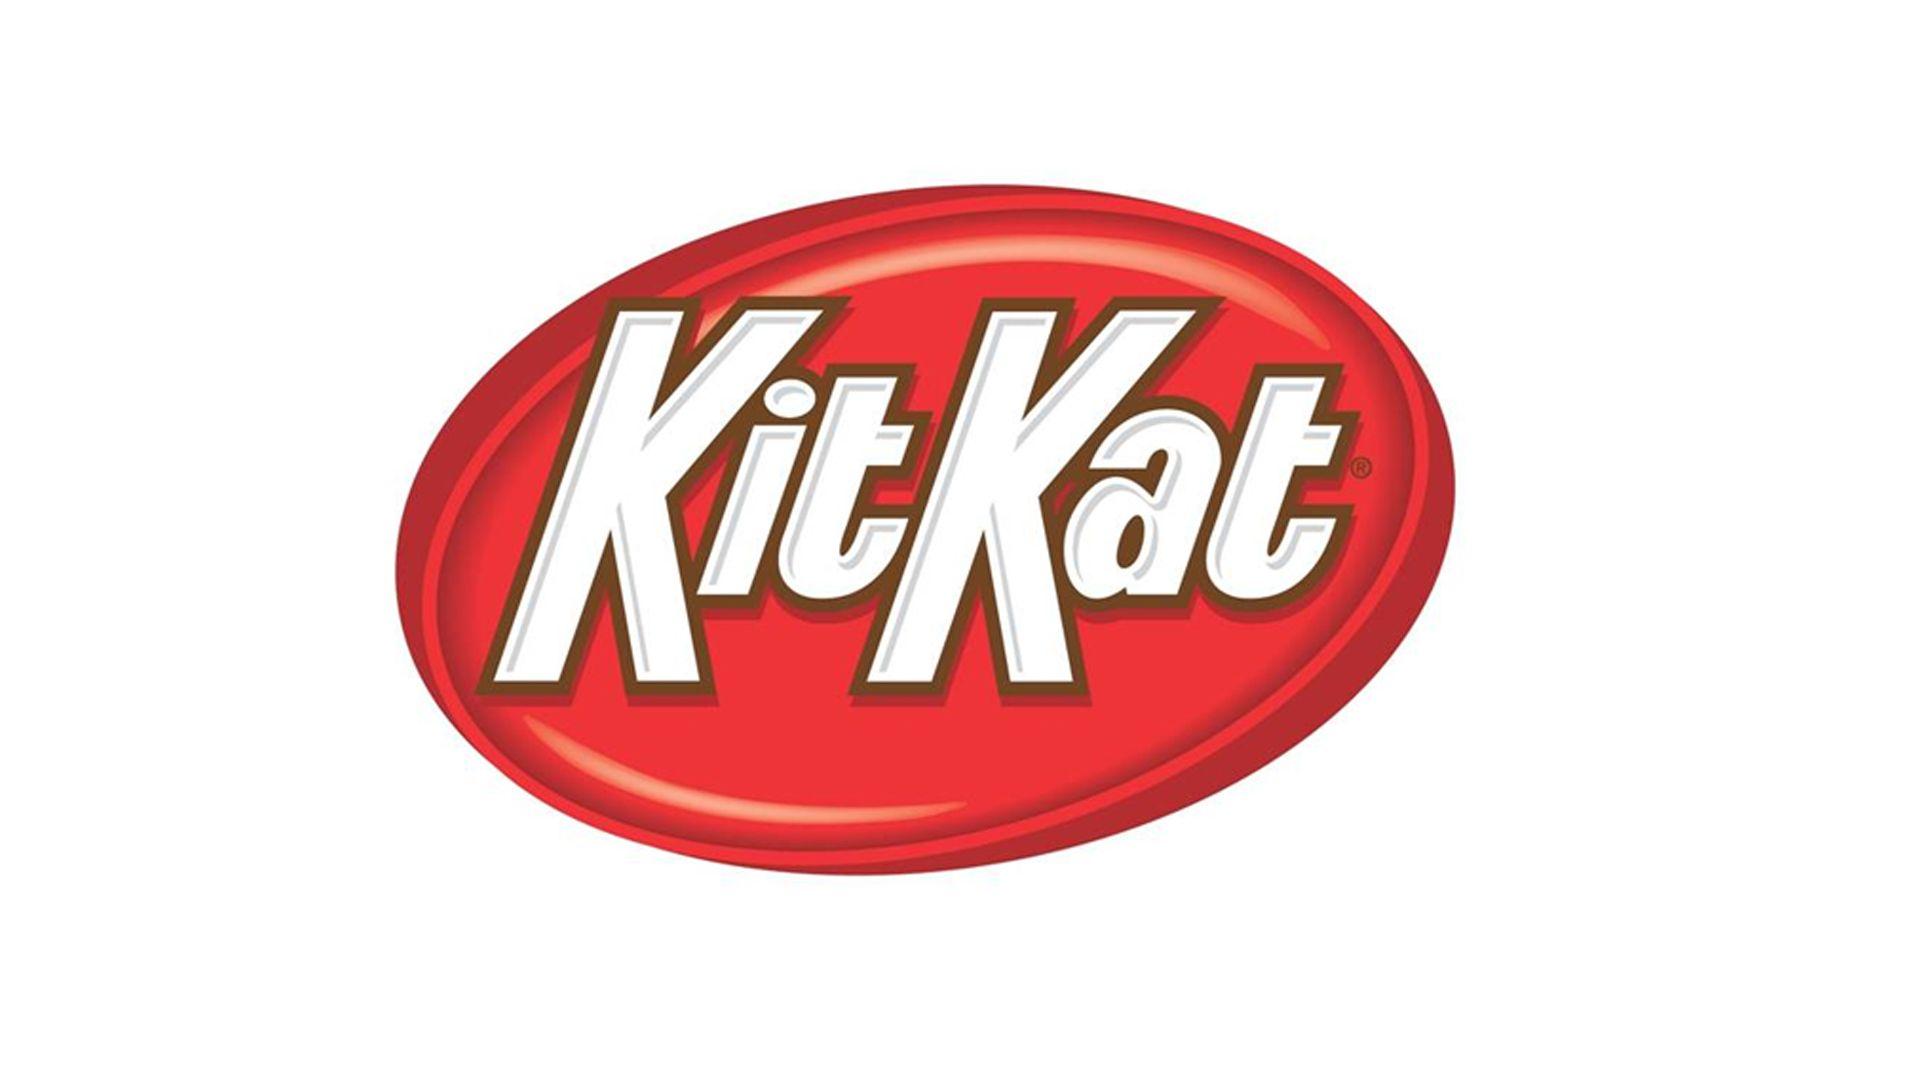 Kit Kat Logo - Kit Kat Logo, Kit Kat Symbol, Meaning, History and Evolution